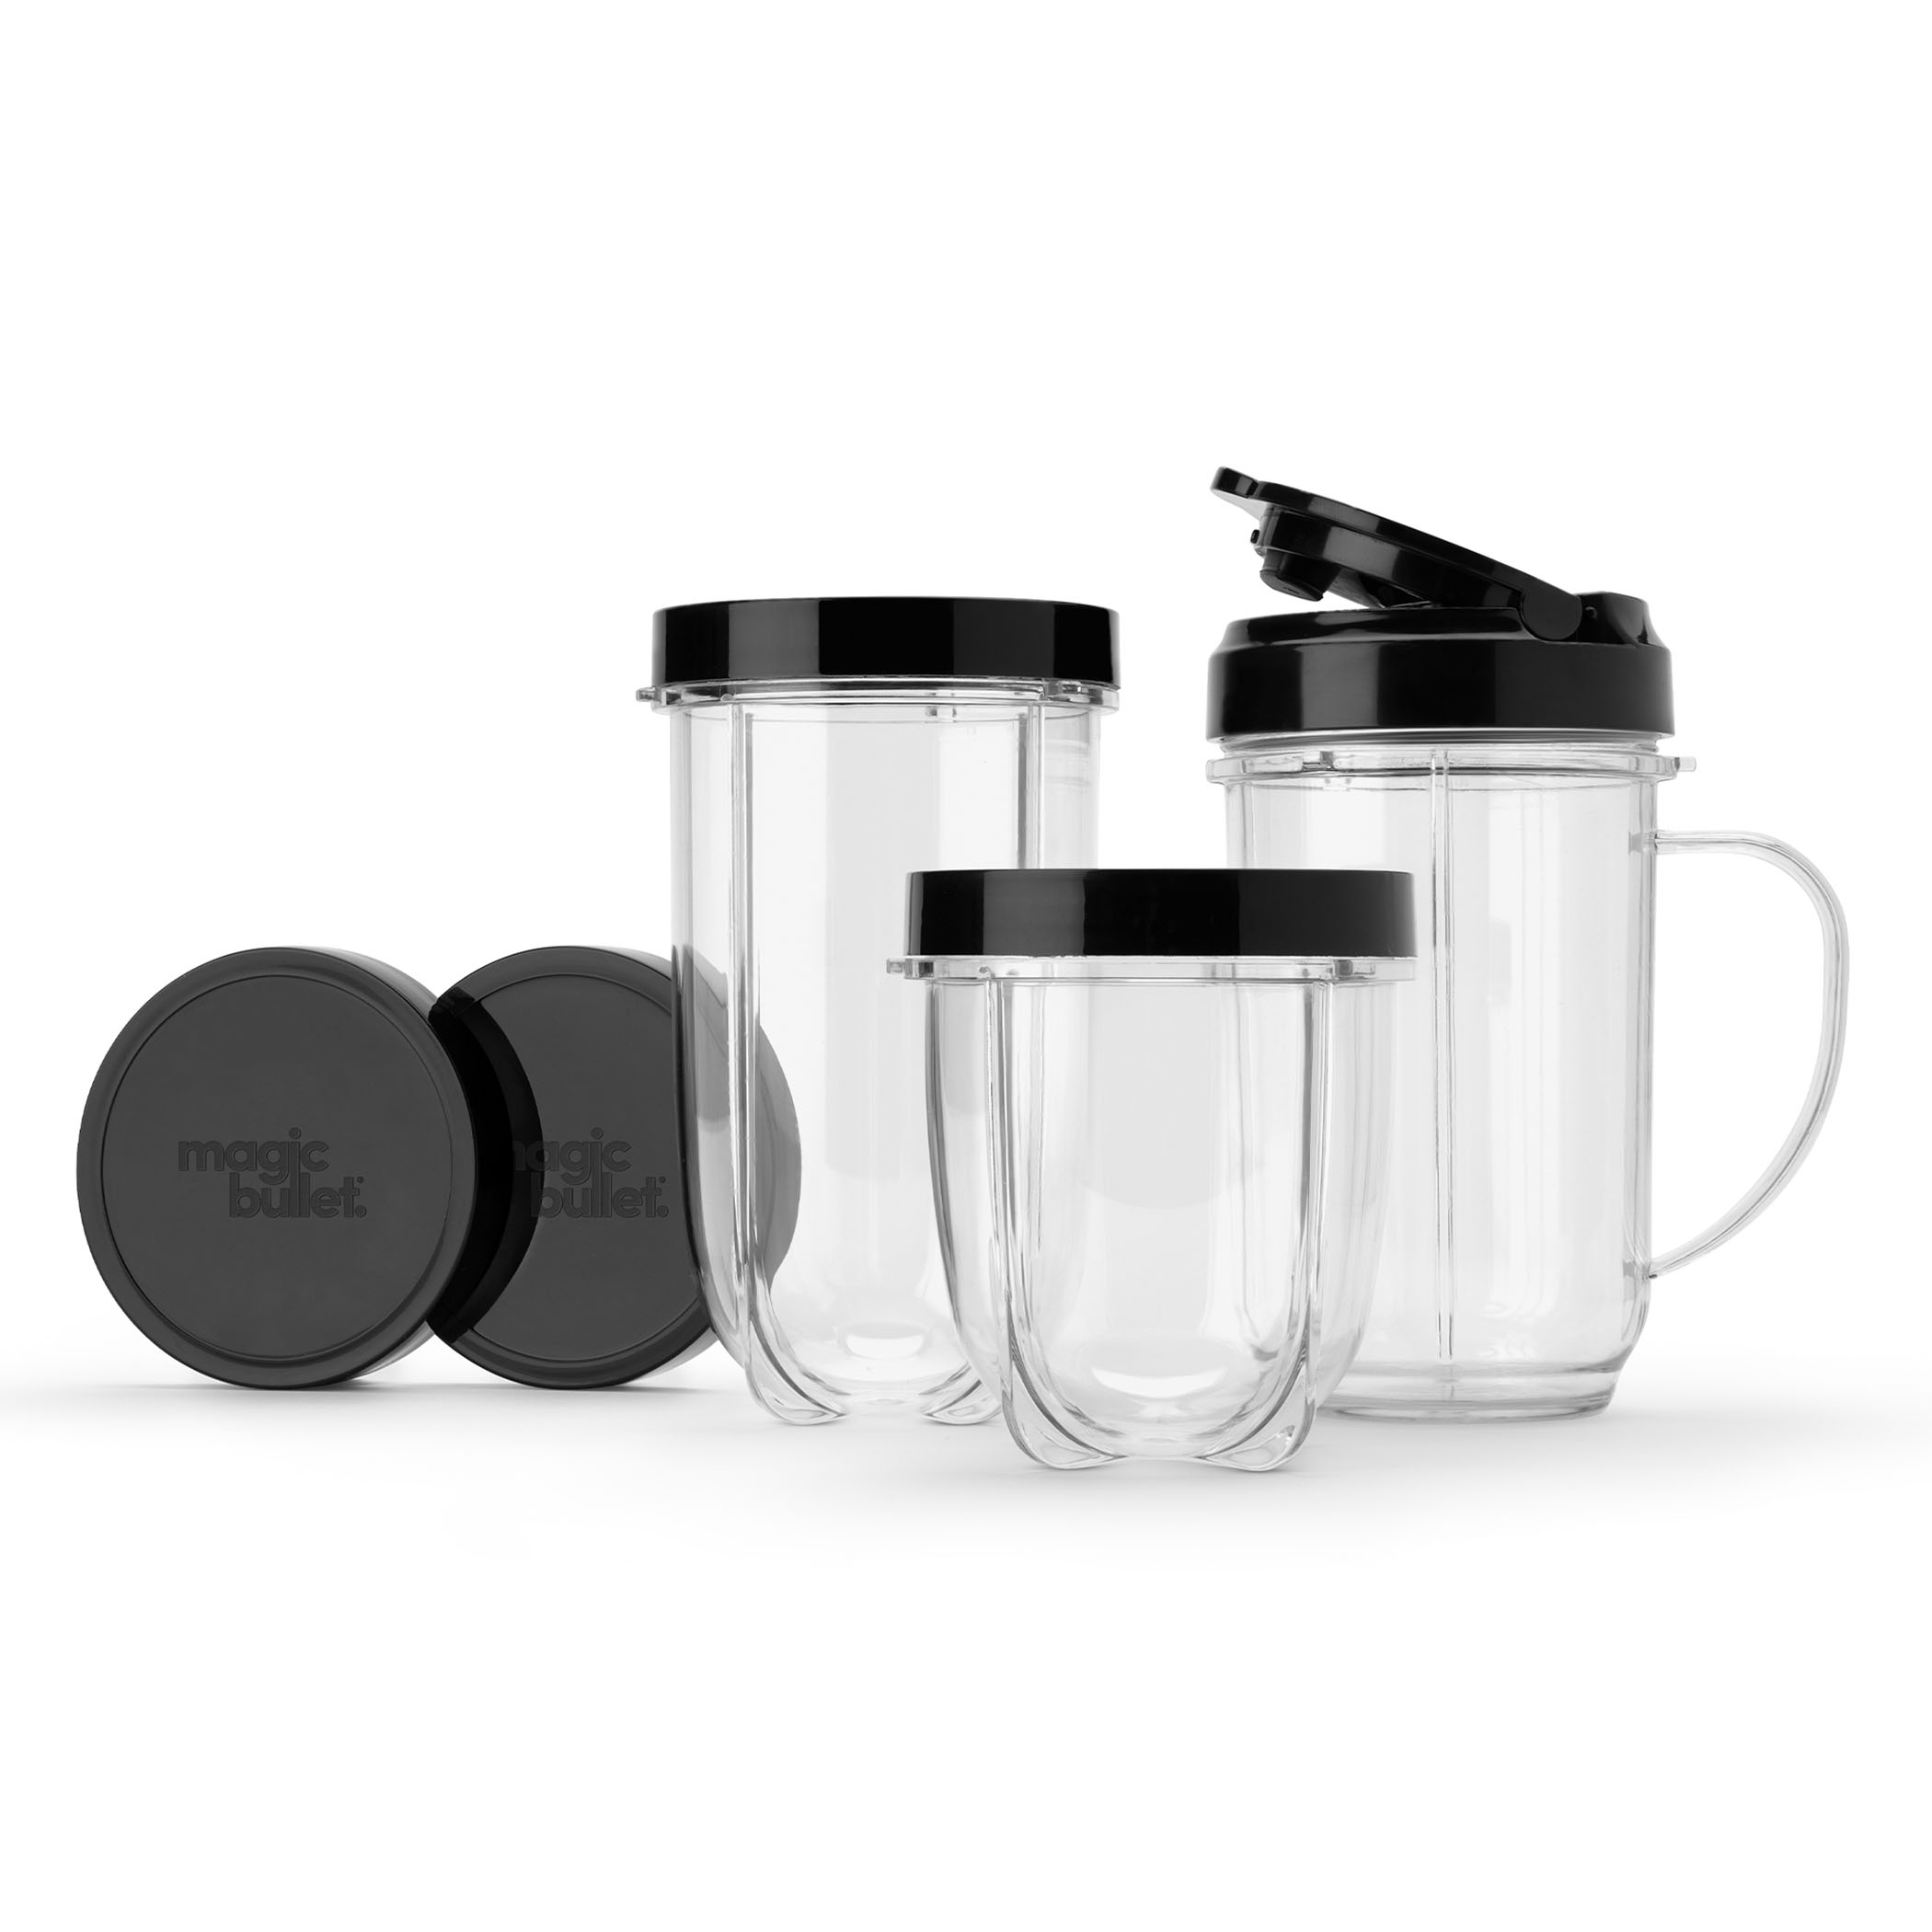 Magic Bullet® 11 Piece Personal Blender MBR-1101 – Silver / Black - image 4 of 11